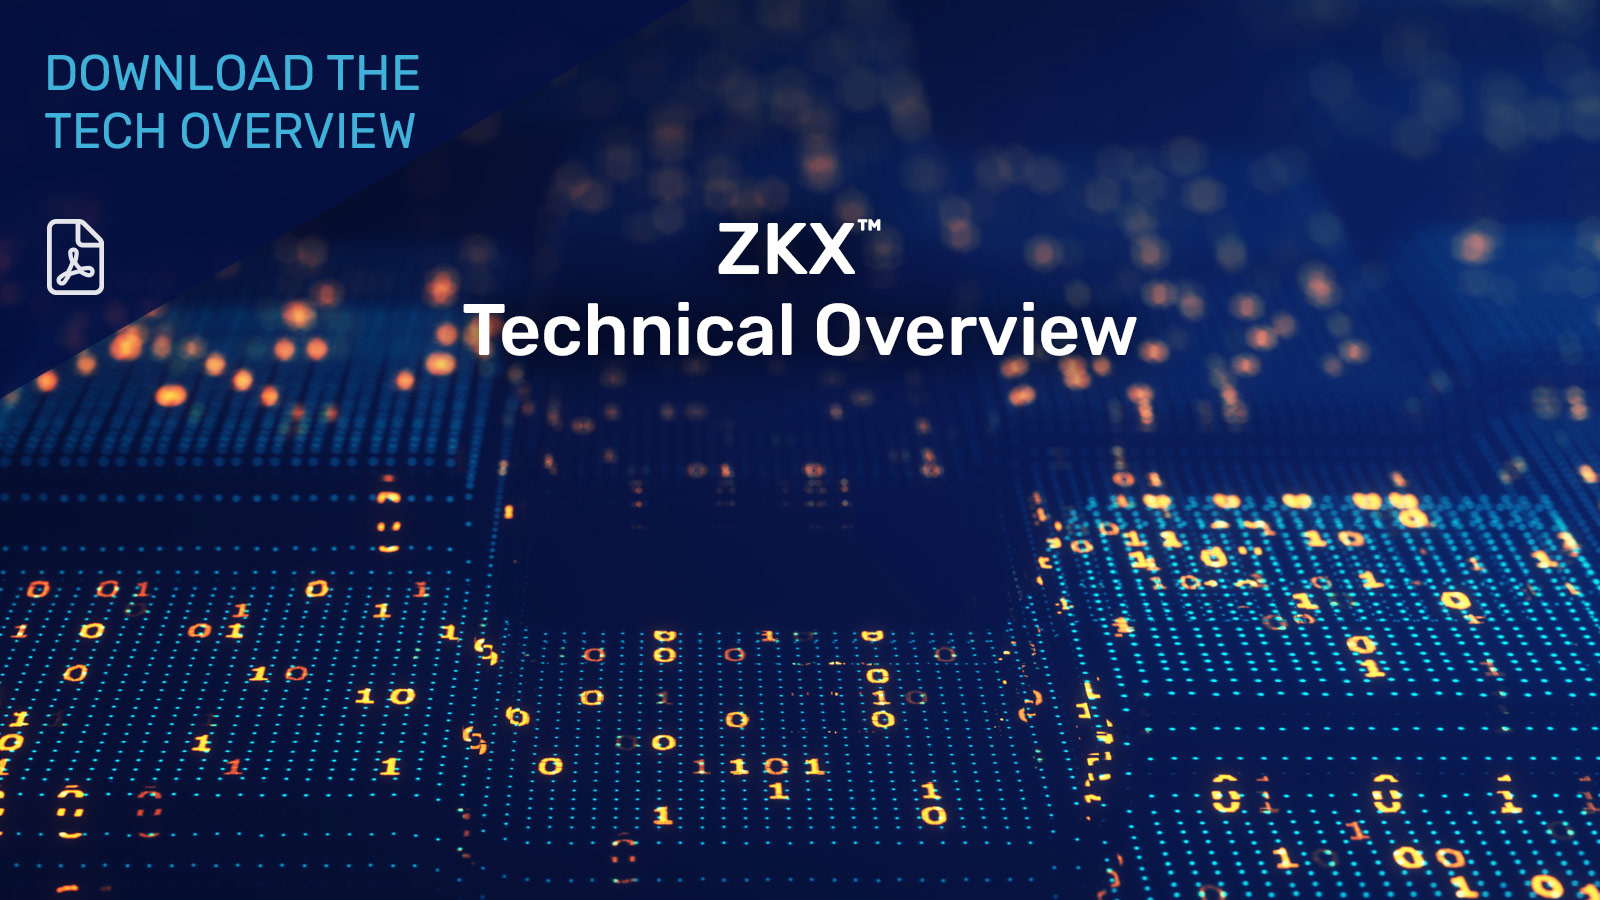 ZKX Technical Overview